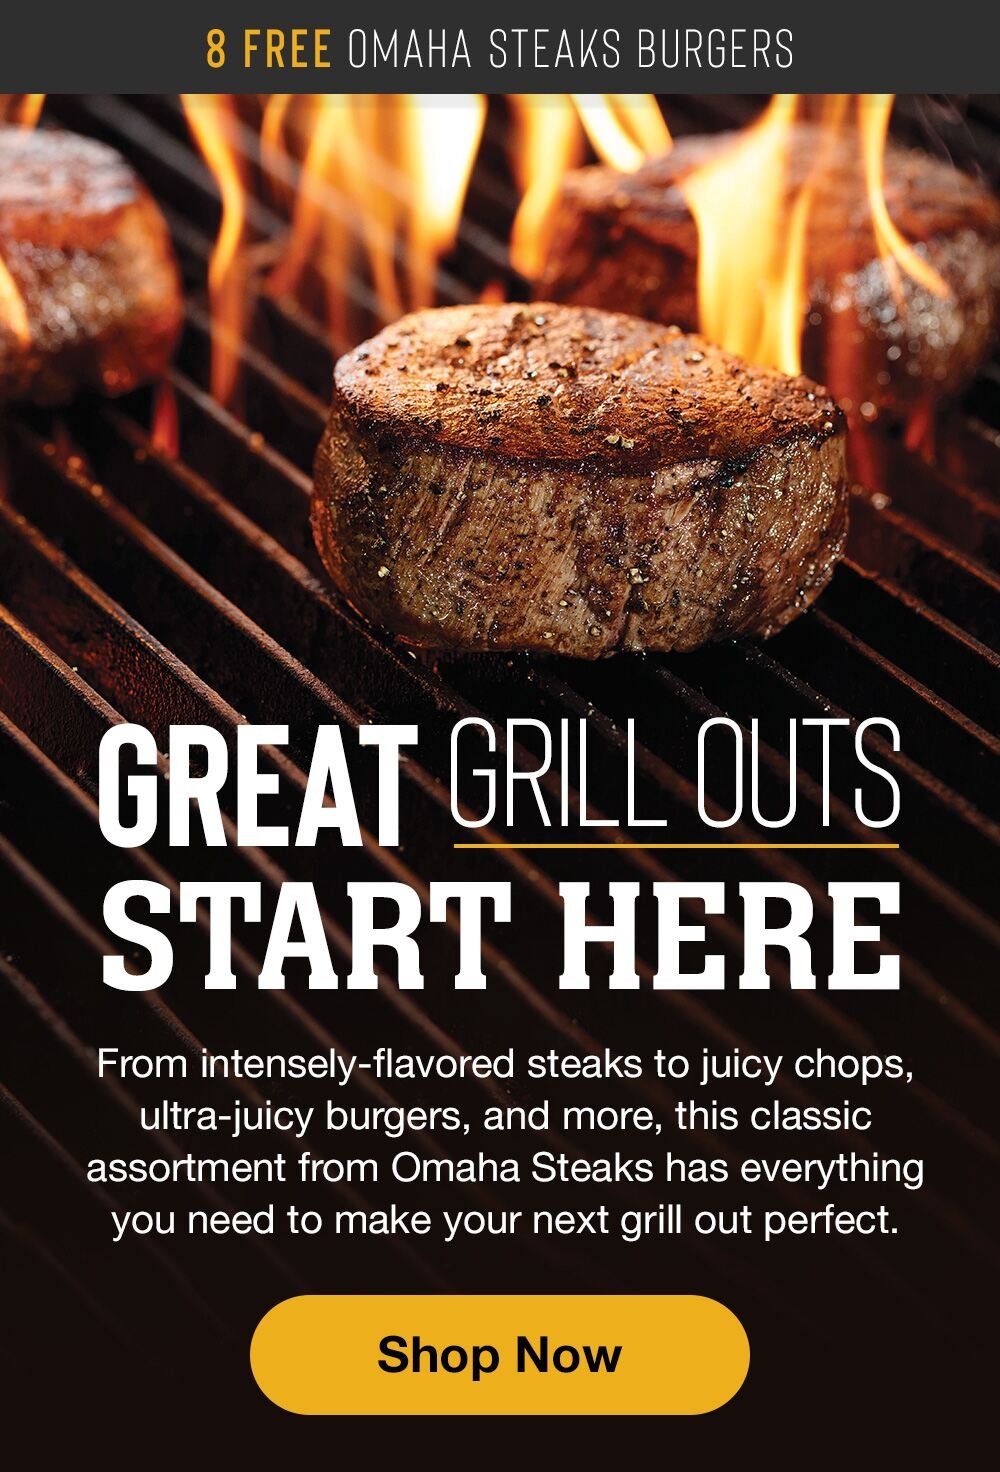 8 FREE OMAHA STEAKS BURGERS | GREAT GRILL OUTS START HERE | From intensely-flavored steaks to juicy chops, ultra-juicy burgers, and more, this classic assortment from Omaha Steaks has everything you need to make your next grill out perfect. || Shop Now